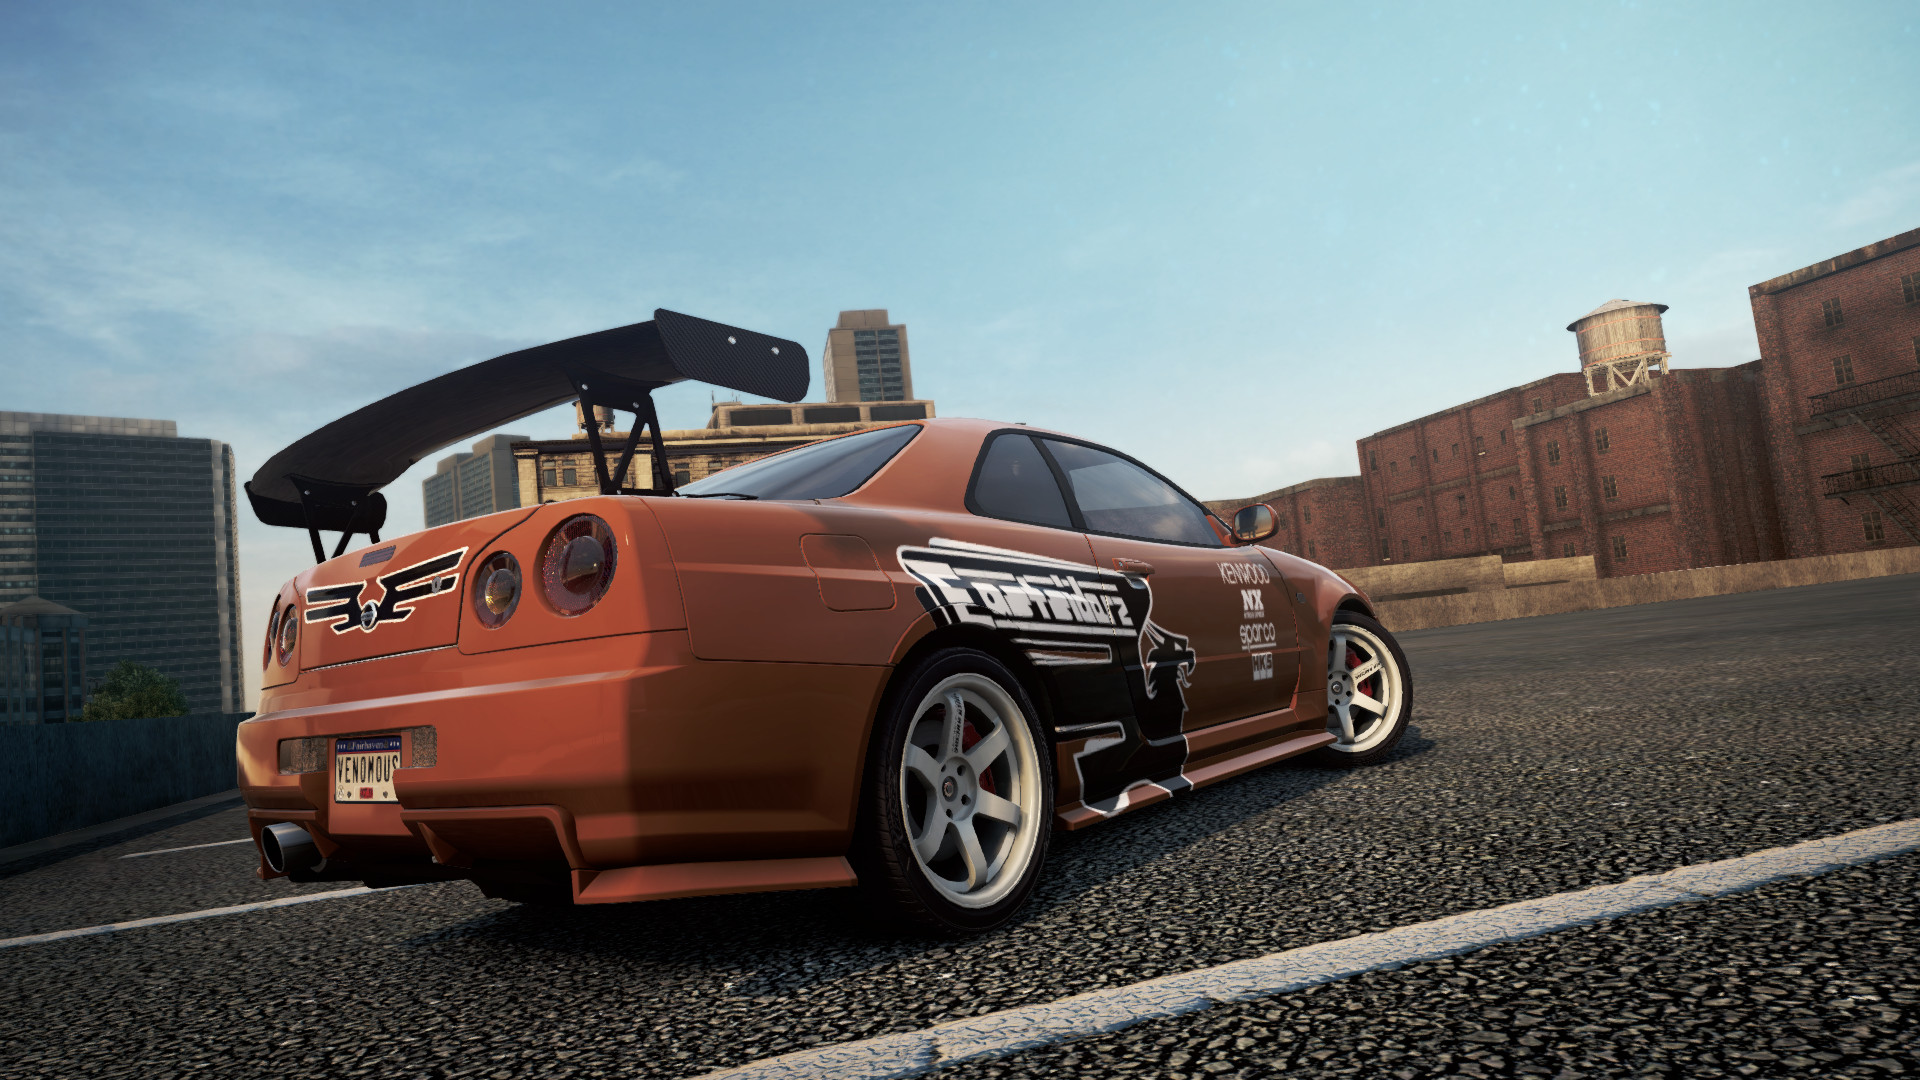 Need For Speed Most Wanted 2012 NFSMW12 - Eddie's Skyline Improved Livery